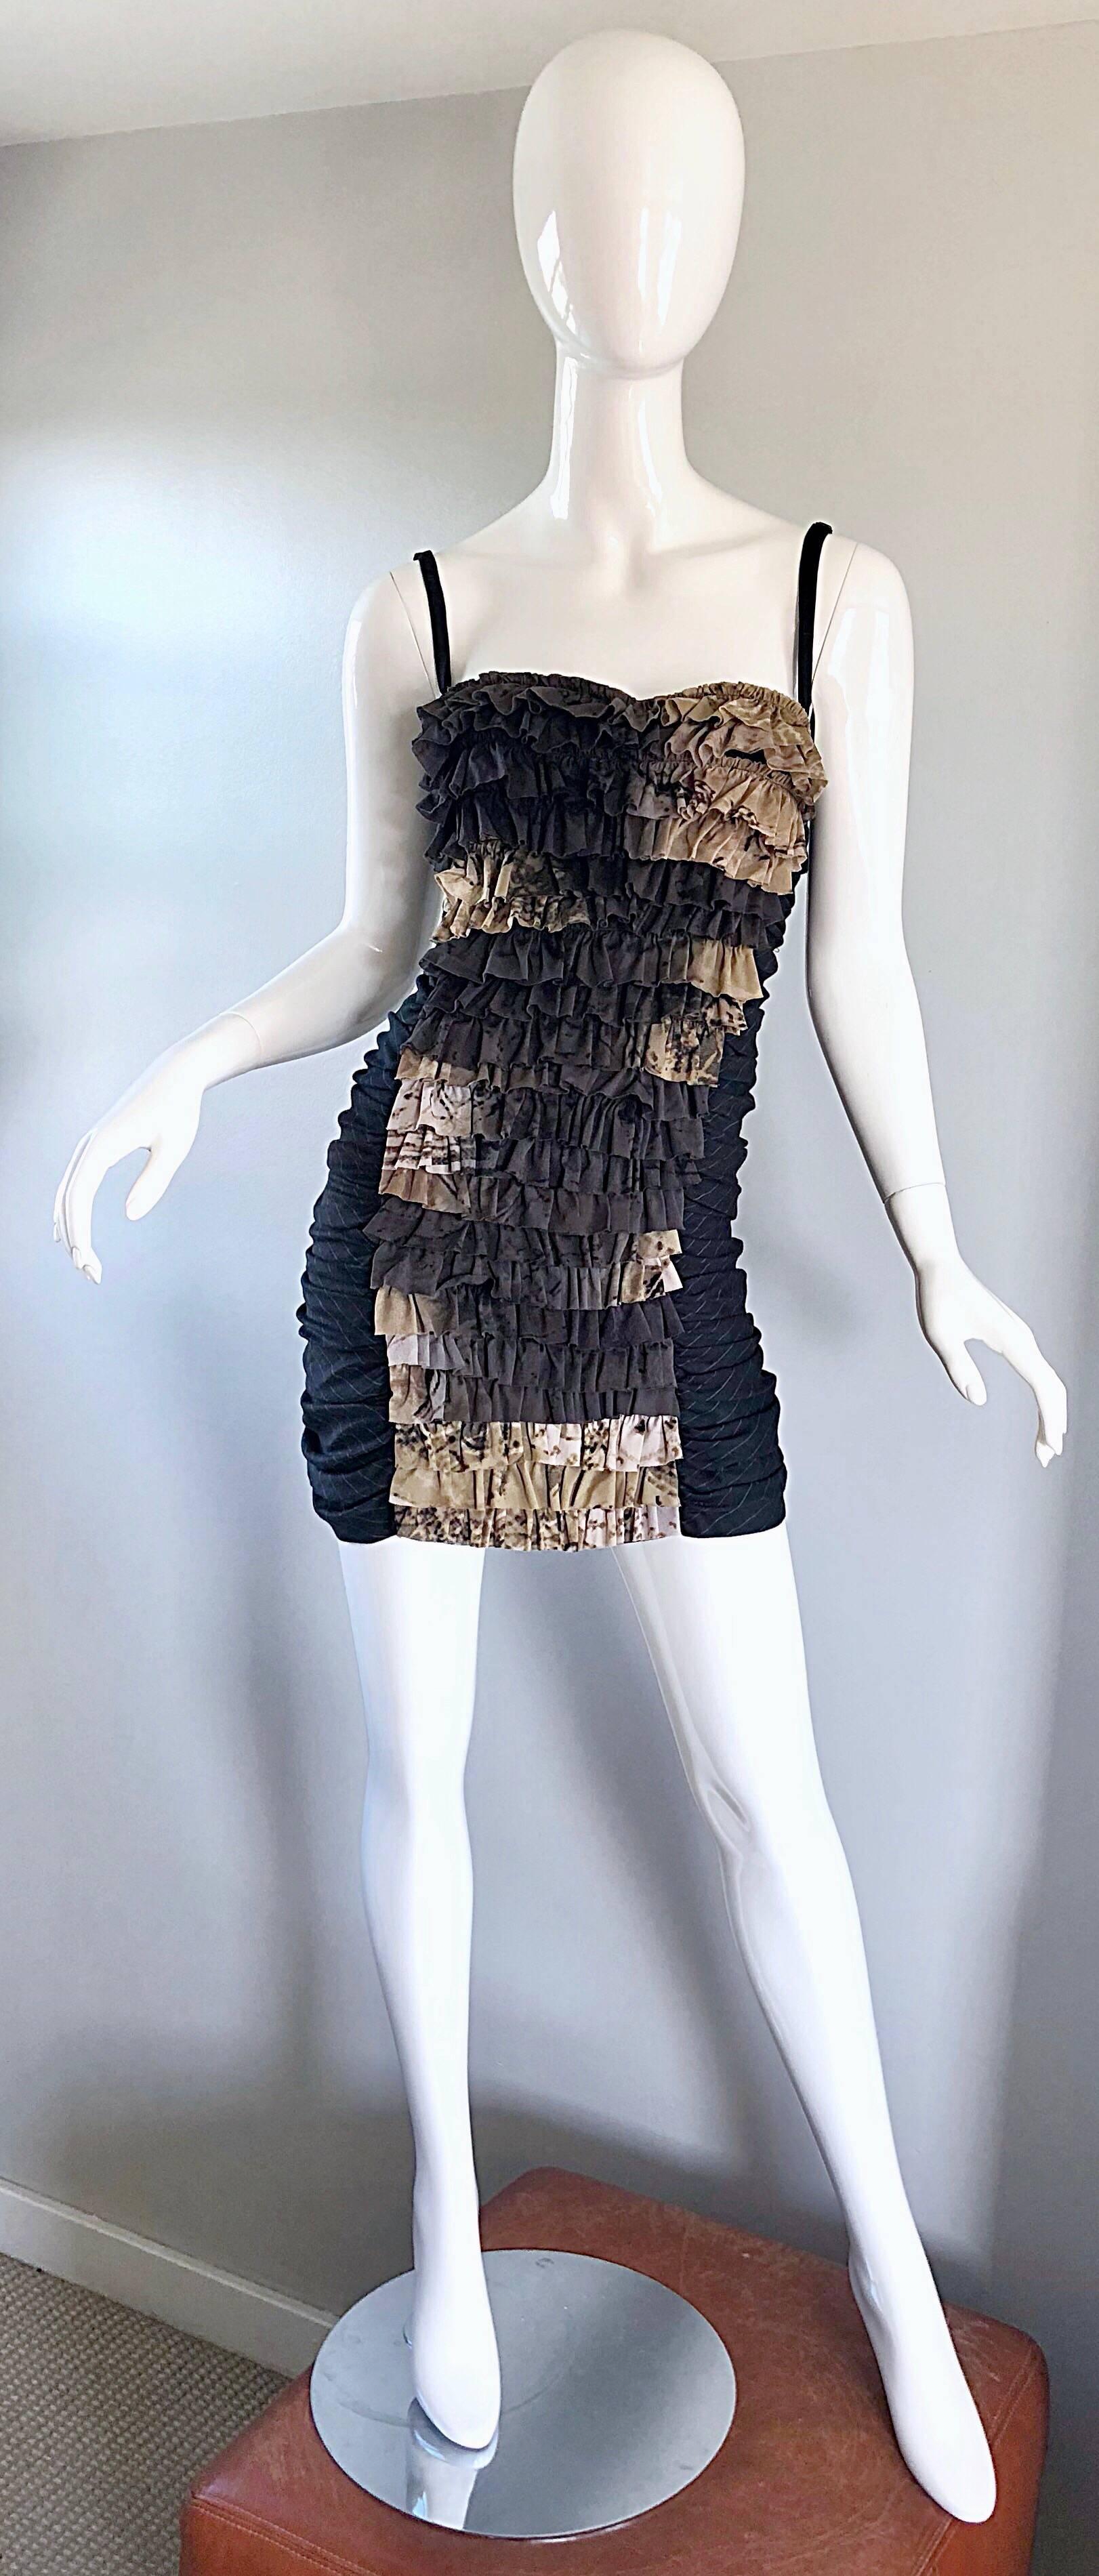 Sexy MARIE GRAZIA PANIZZI Avant garde pinstripe convertible strap mini dress! Features a deep charcoal grey / black ruched pinstripe soft cotton/rayon blend fabric. Tan, beige, grey, ivory, and snakeskin print mesh ruffles on the center front. Full